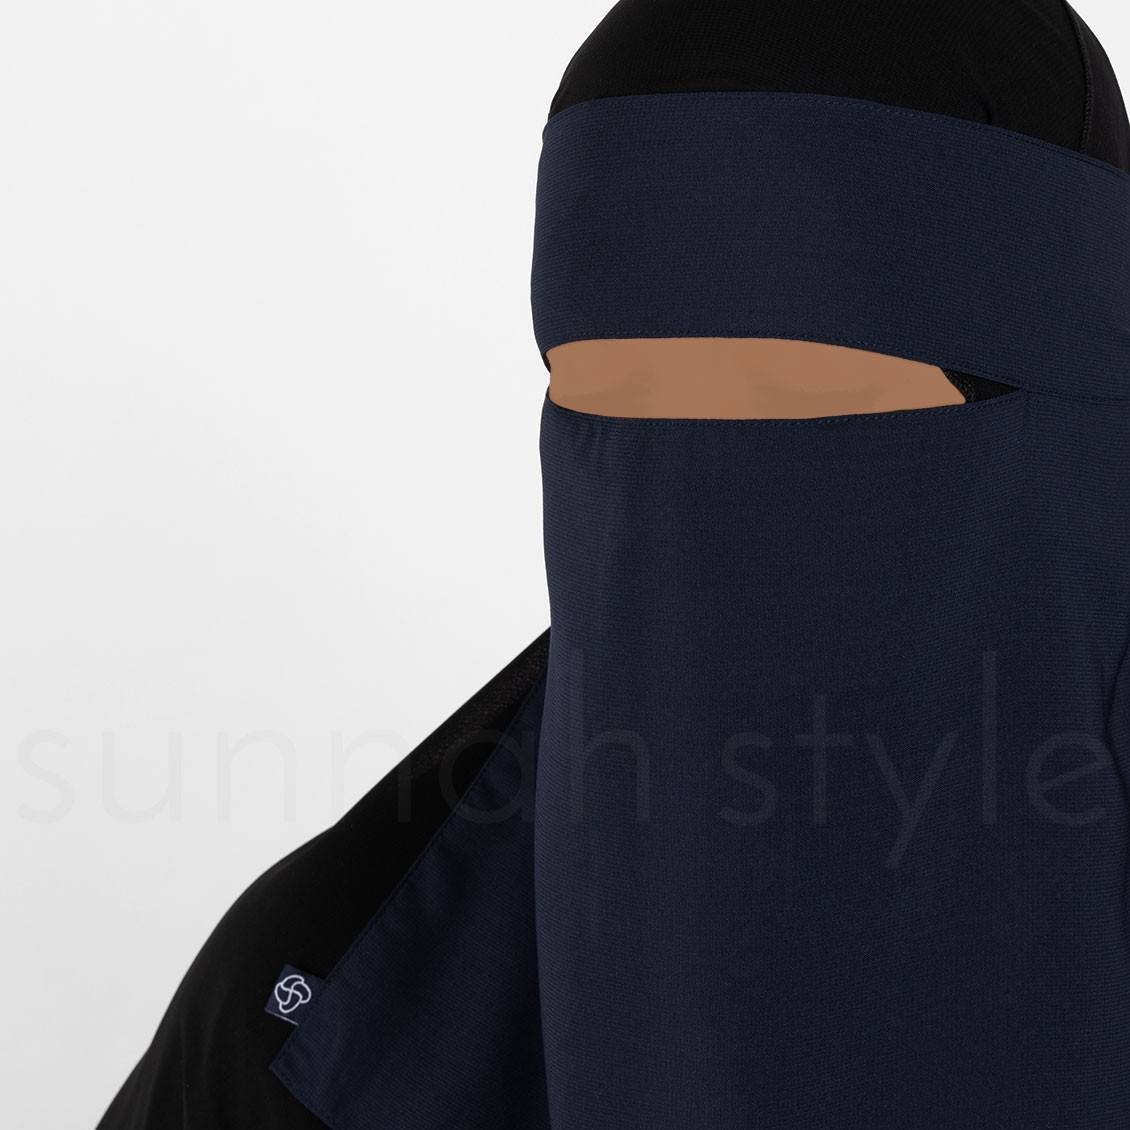 Sunnah Style Short One Layer Niqab Navy Blue